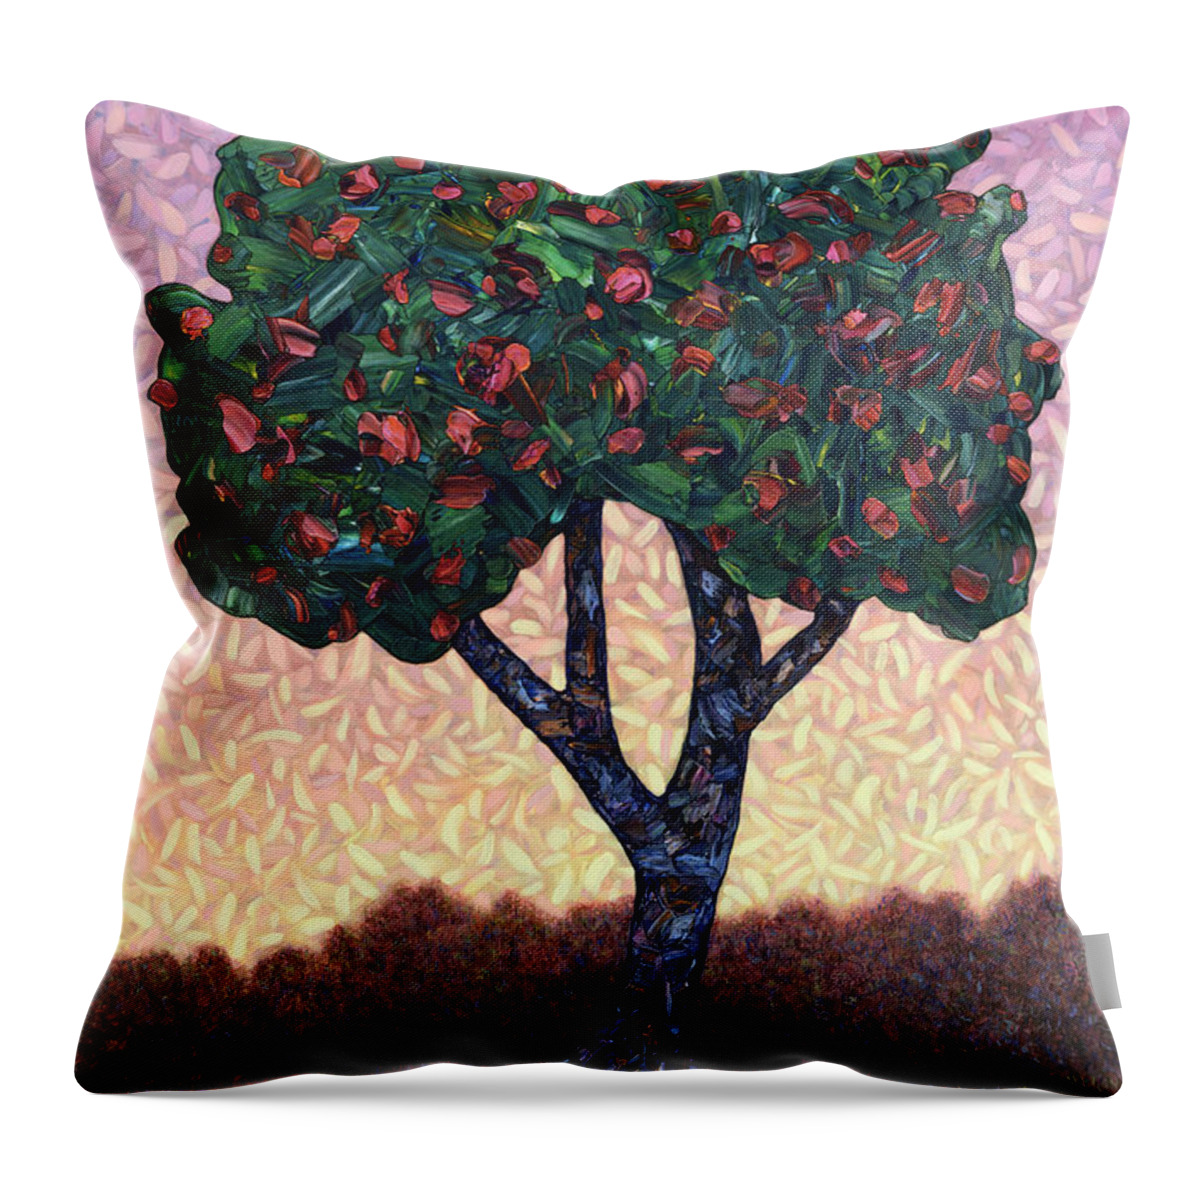 Apple Tree Throw Pillow featuring the painting Apple Tree by James W Johnson